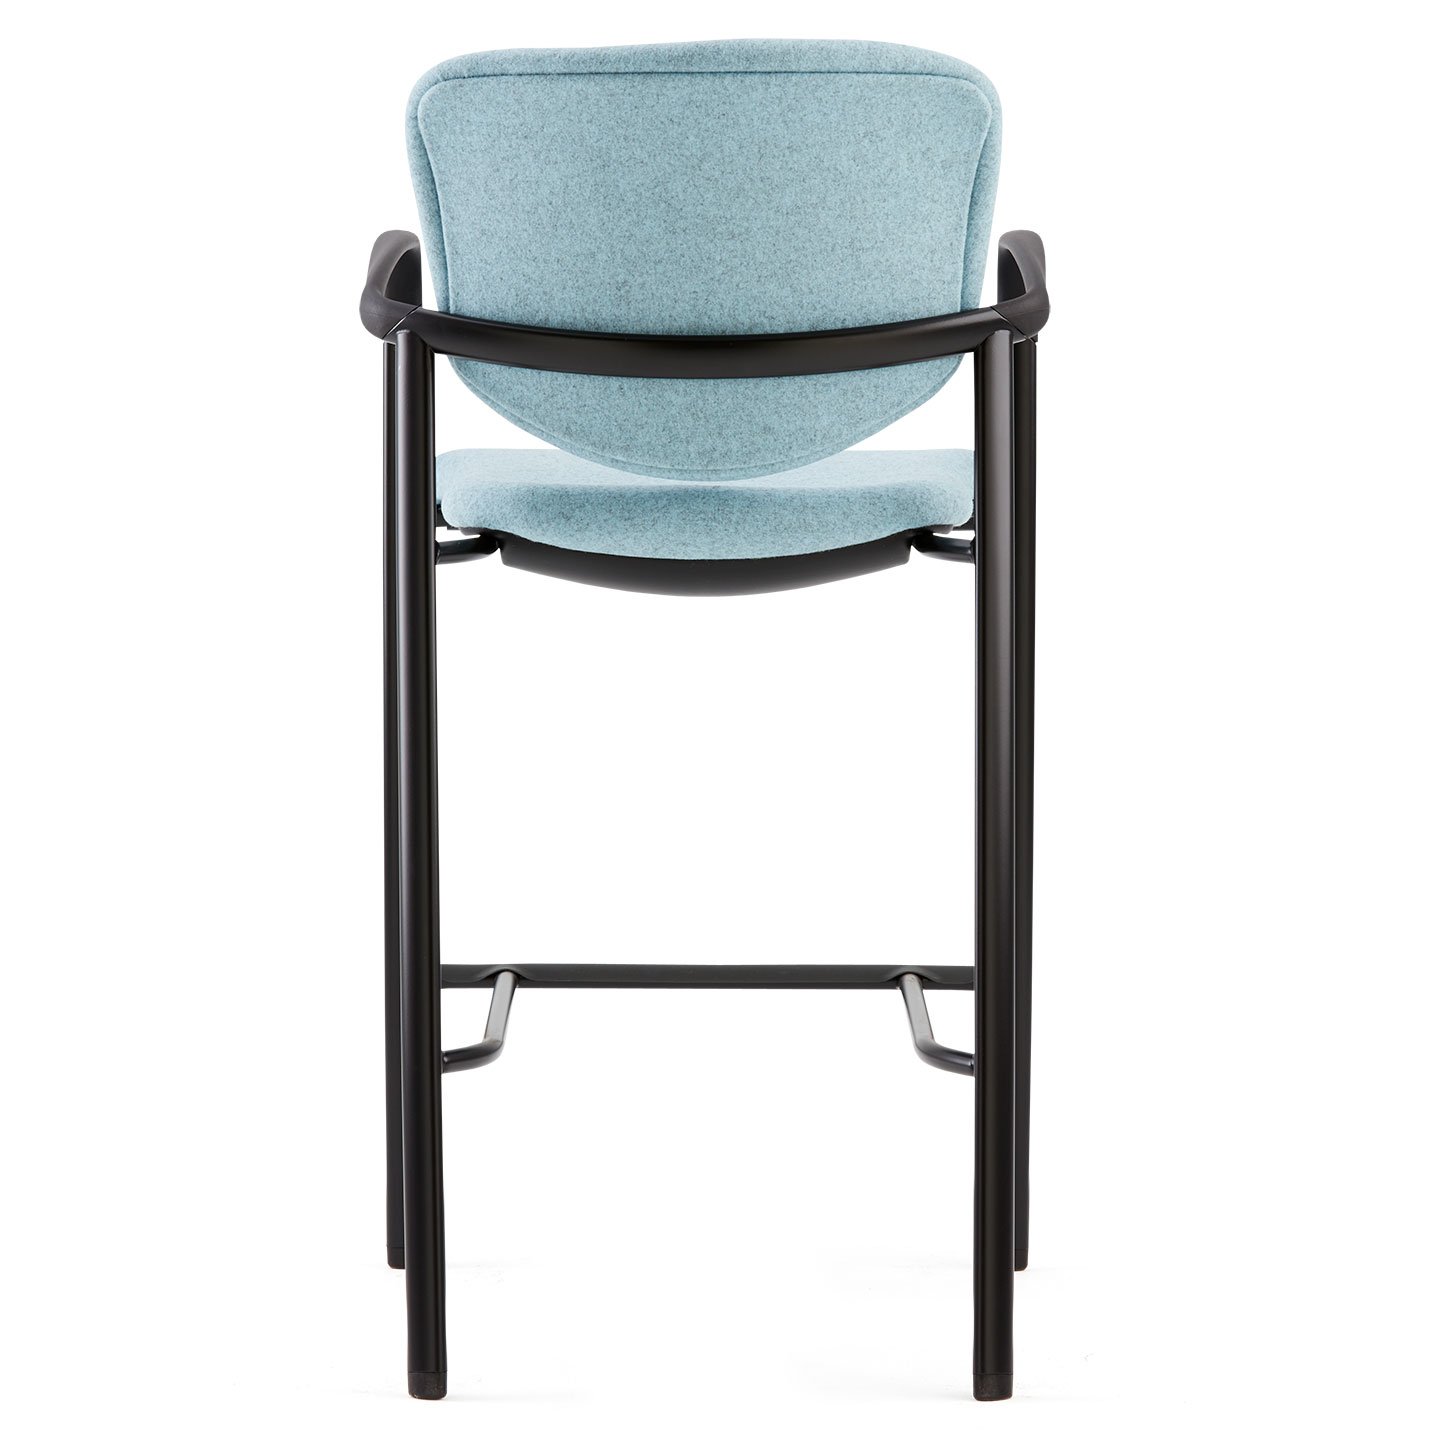 Haworth Improv Stool in blue upholstery and black metal legs rear view